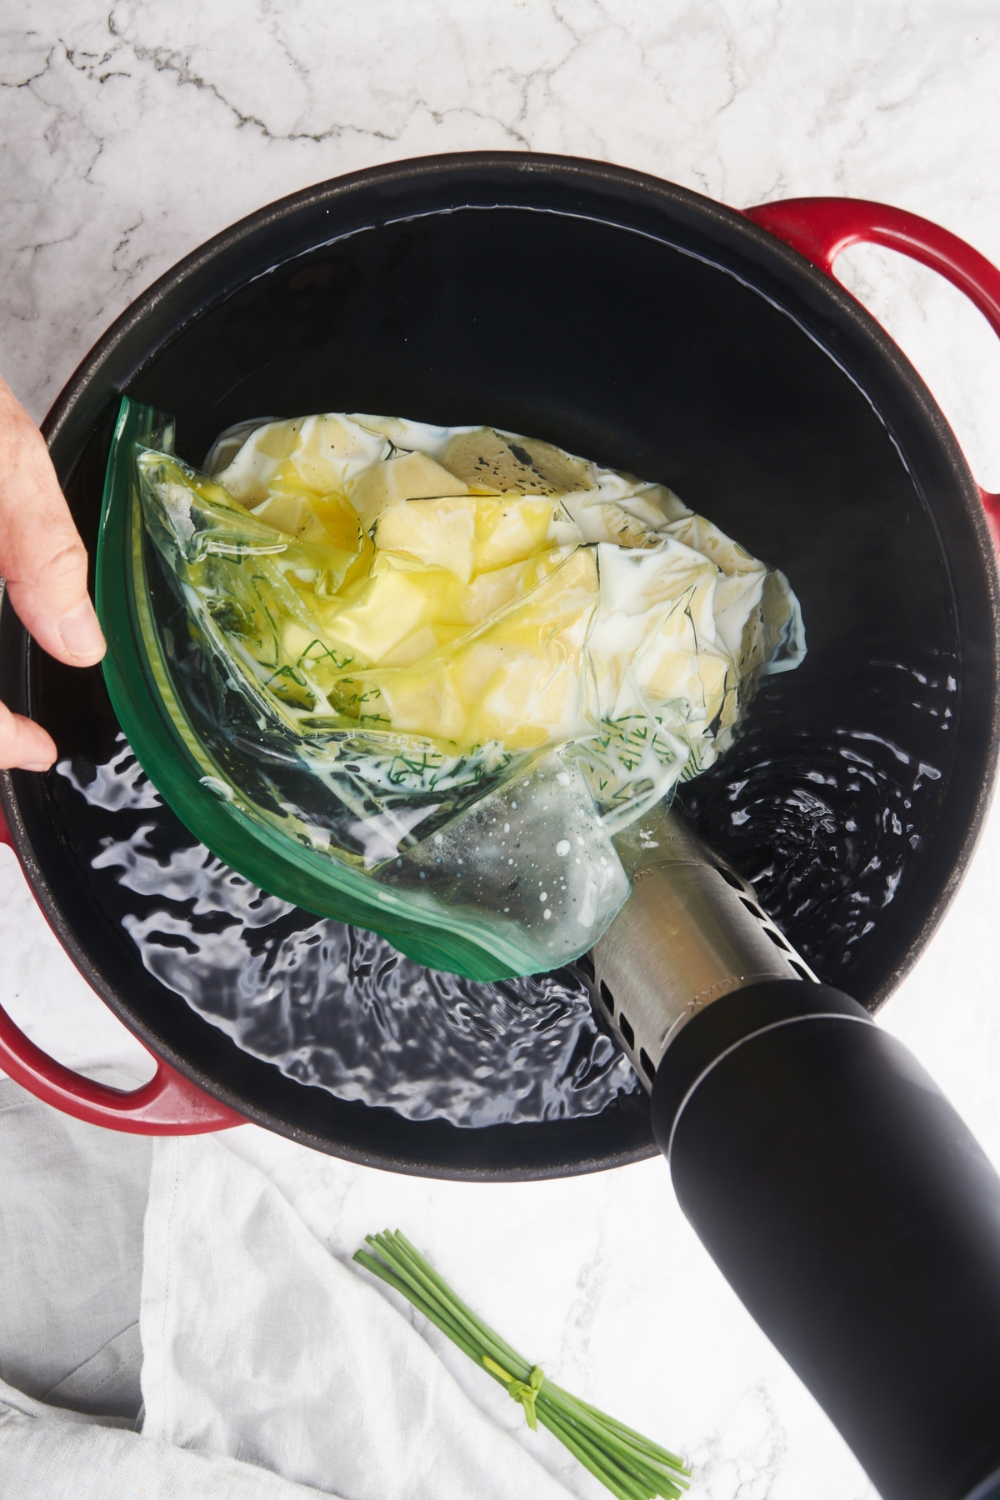 A bag of diced potatoes being placed in a large pot of water with a sous vide machine in it.